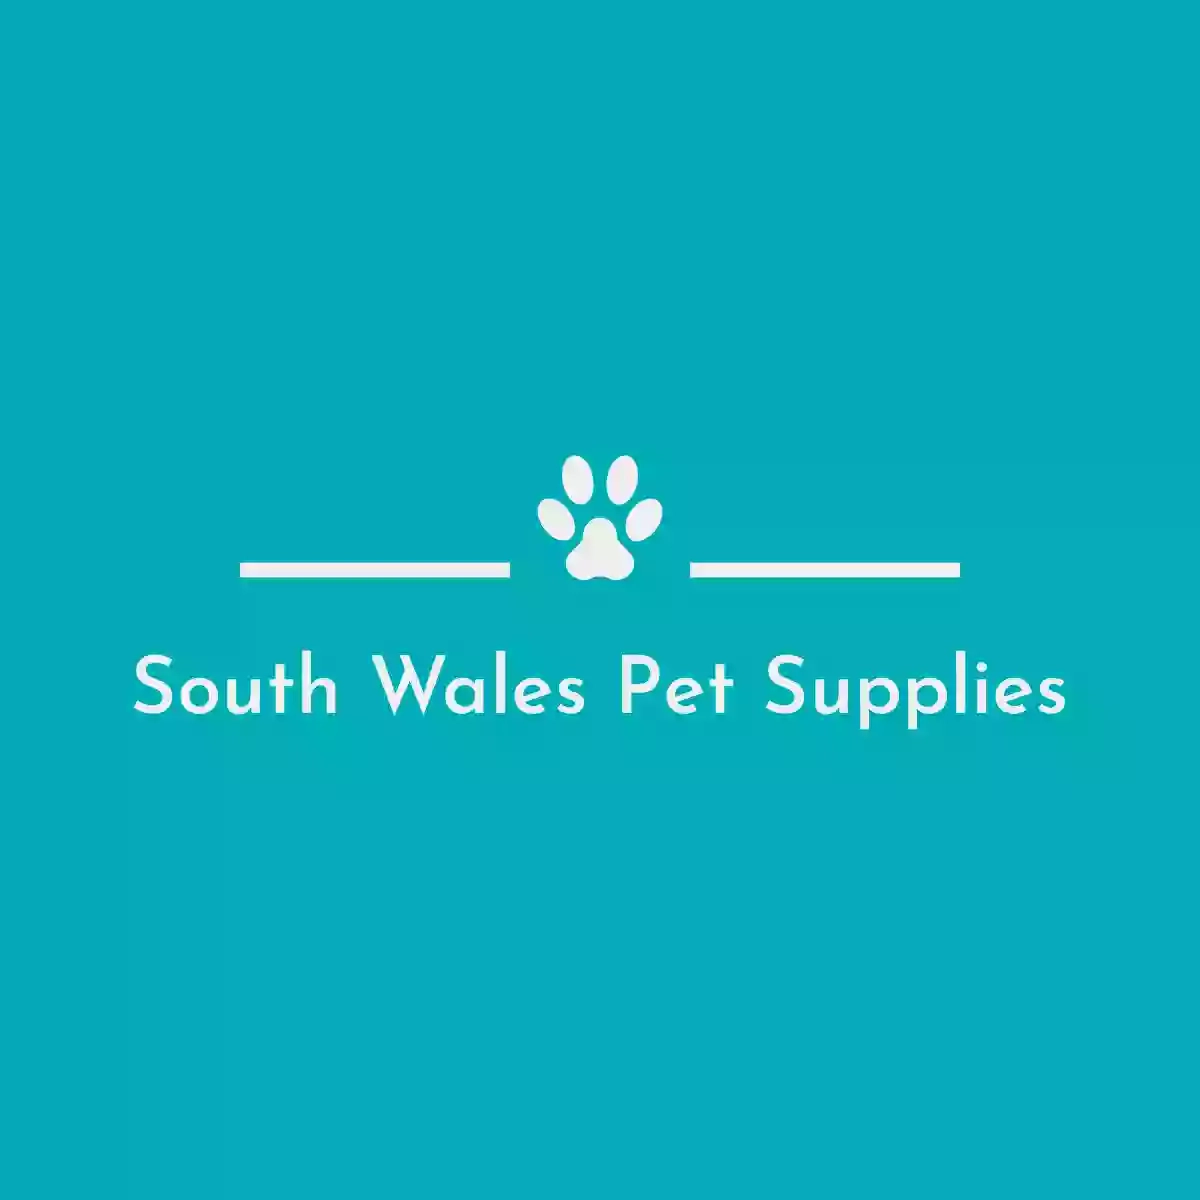 South Wales Pet Supplies